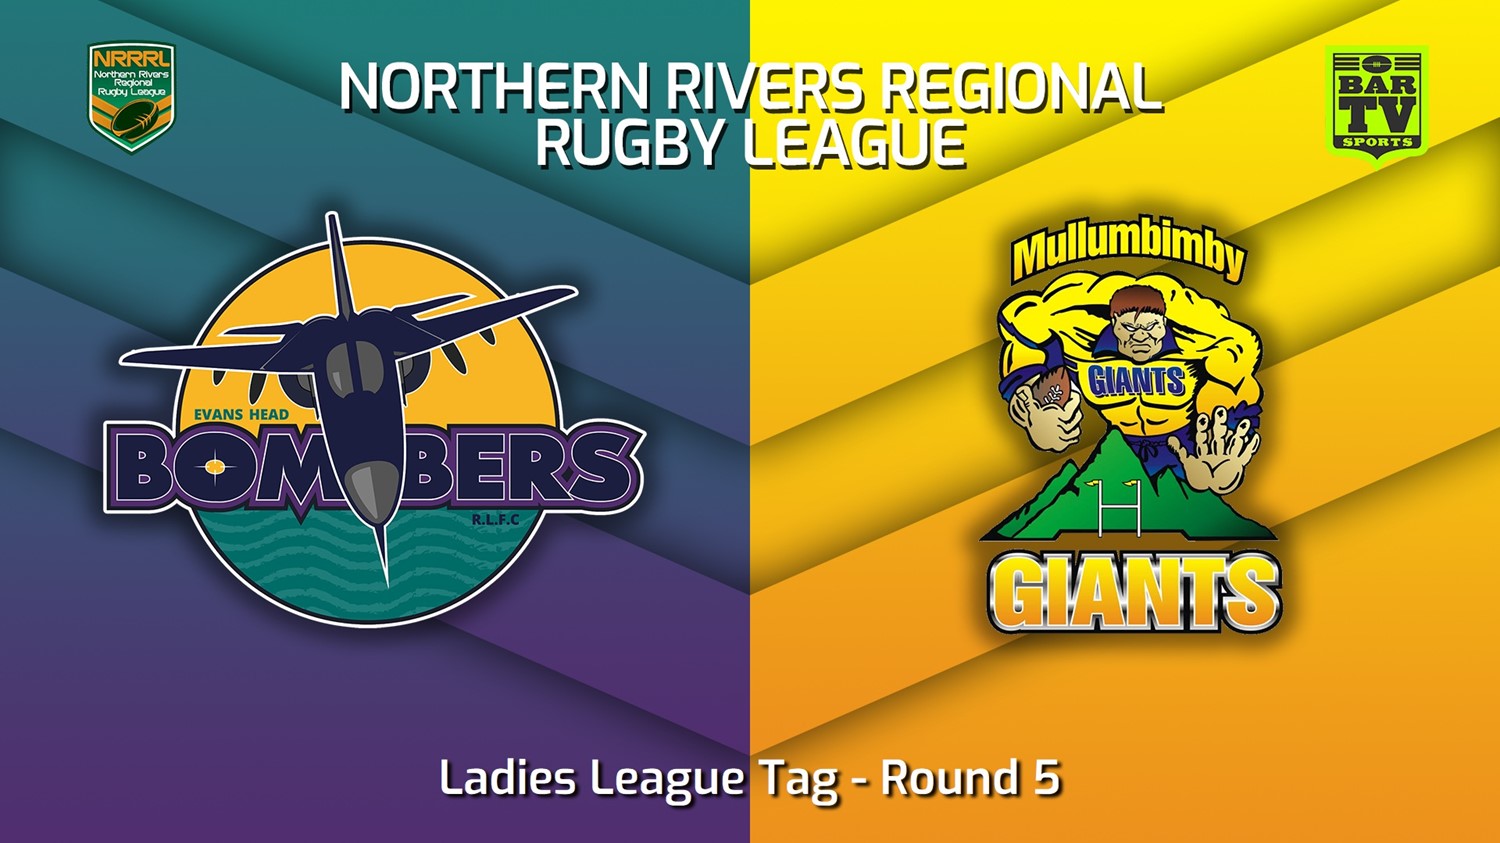 220807-Northern Rivers Round 5 - Ladies League Tag - Evans Head Bombers v Mullumbimby Giants Slate Image